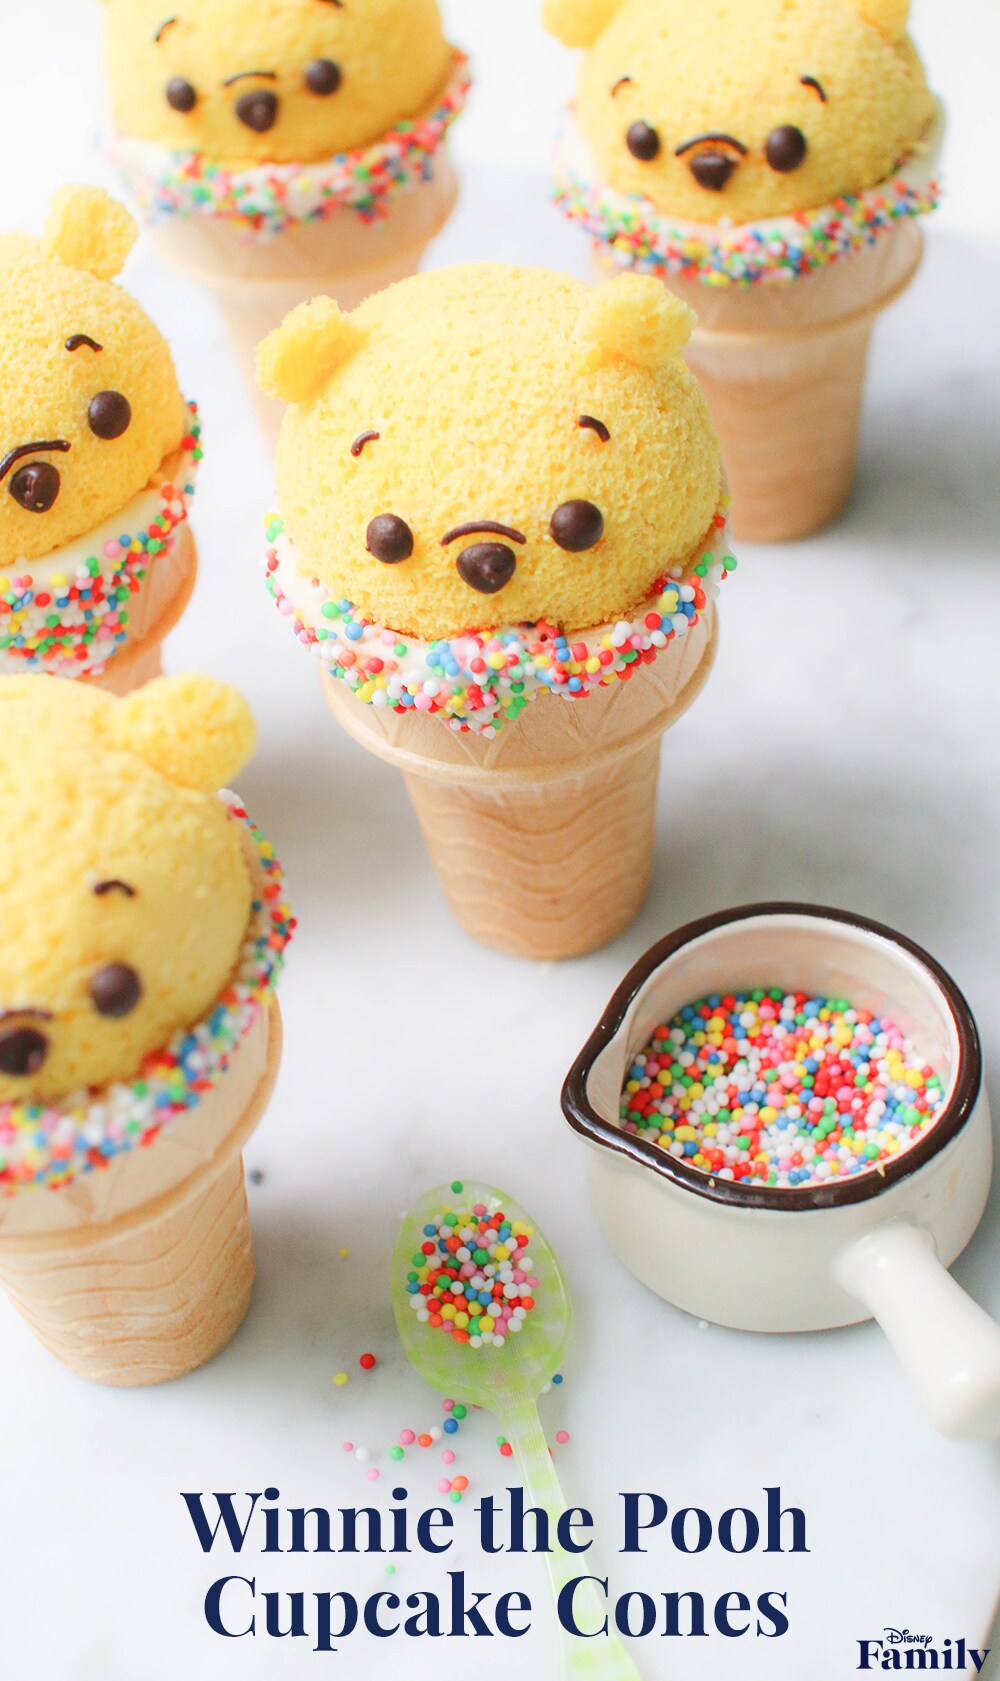 Several Winnie the Pooh shaped cupcakes in sprinkle covered ice cream cones.